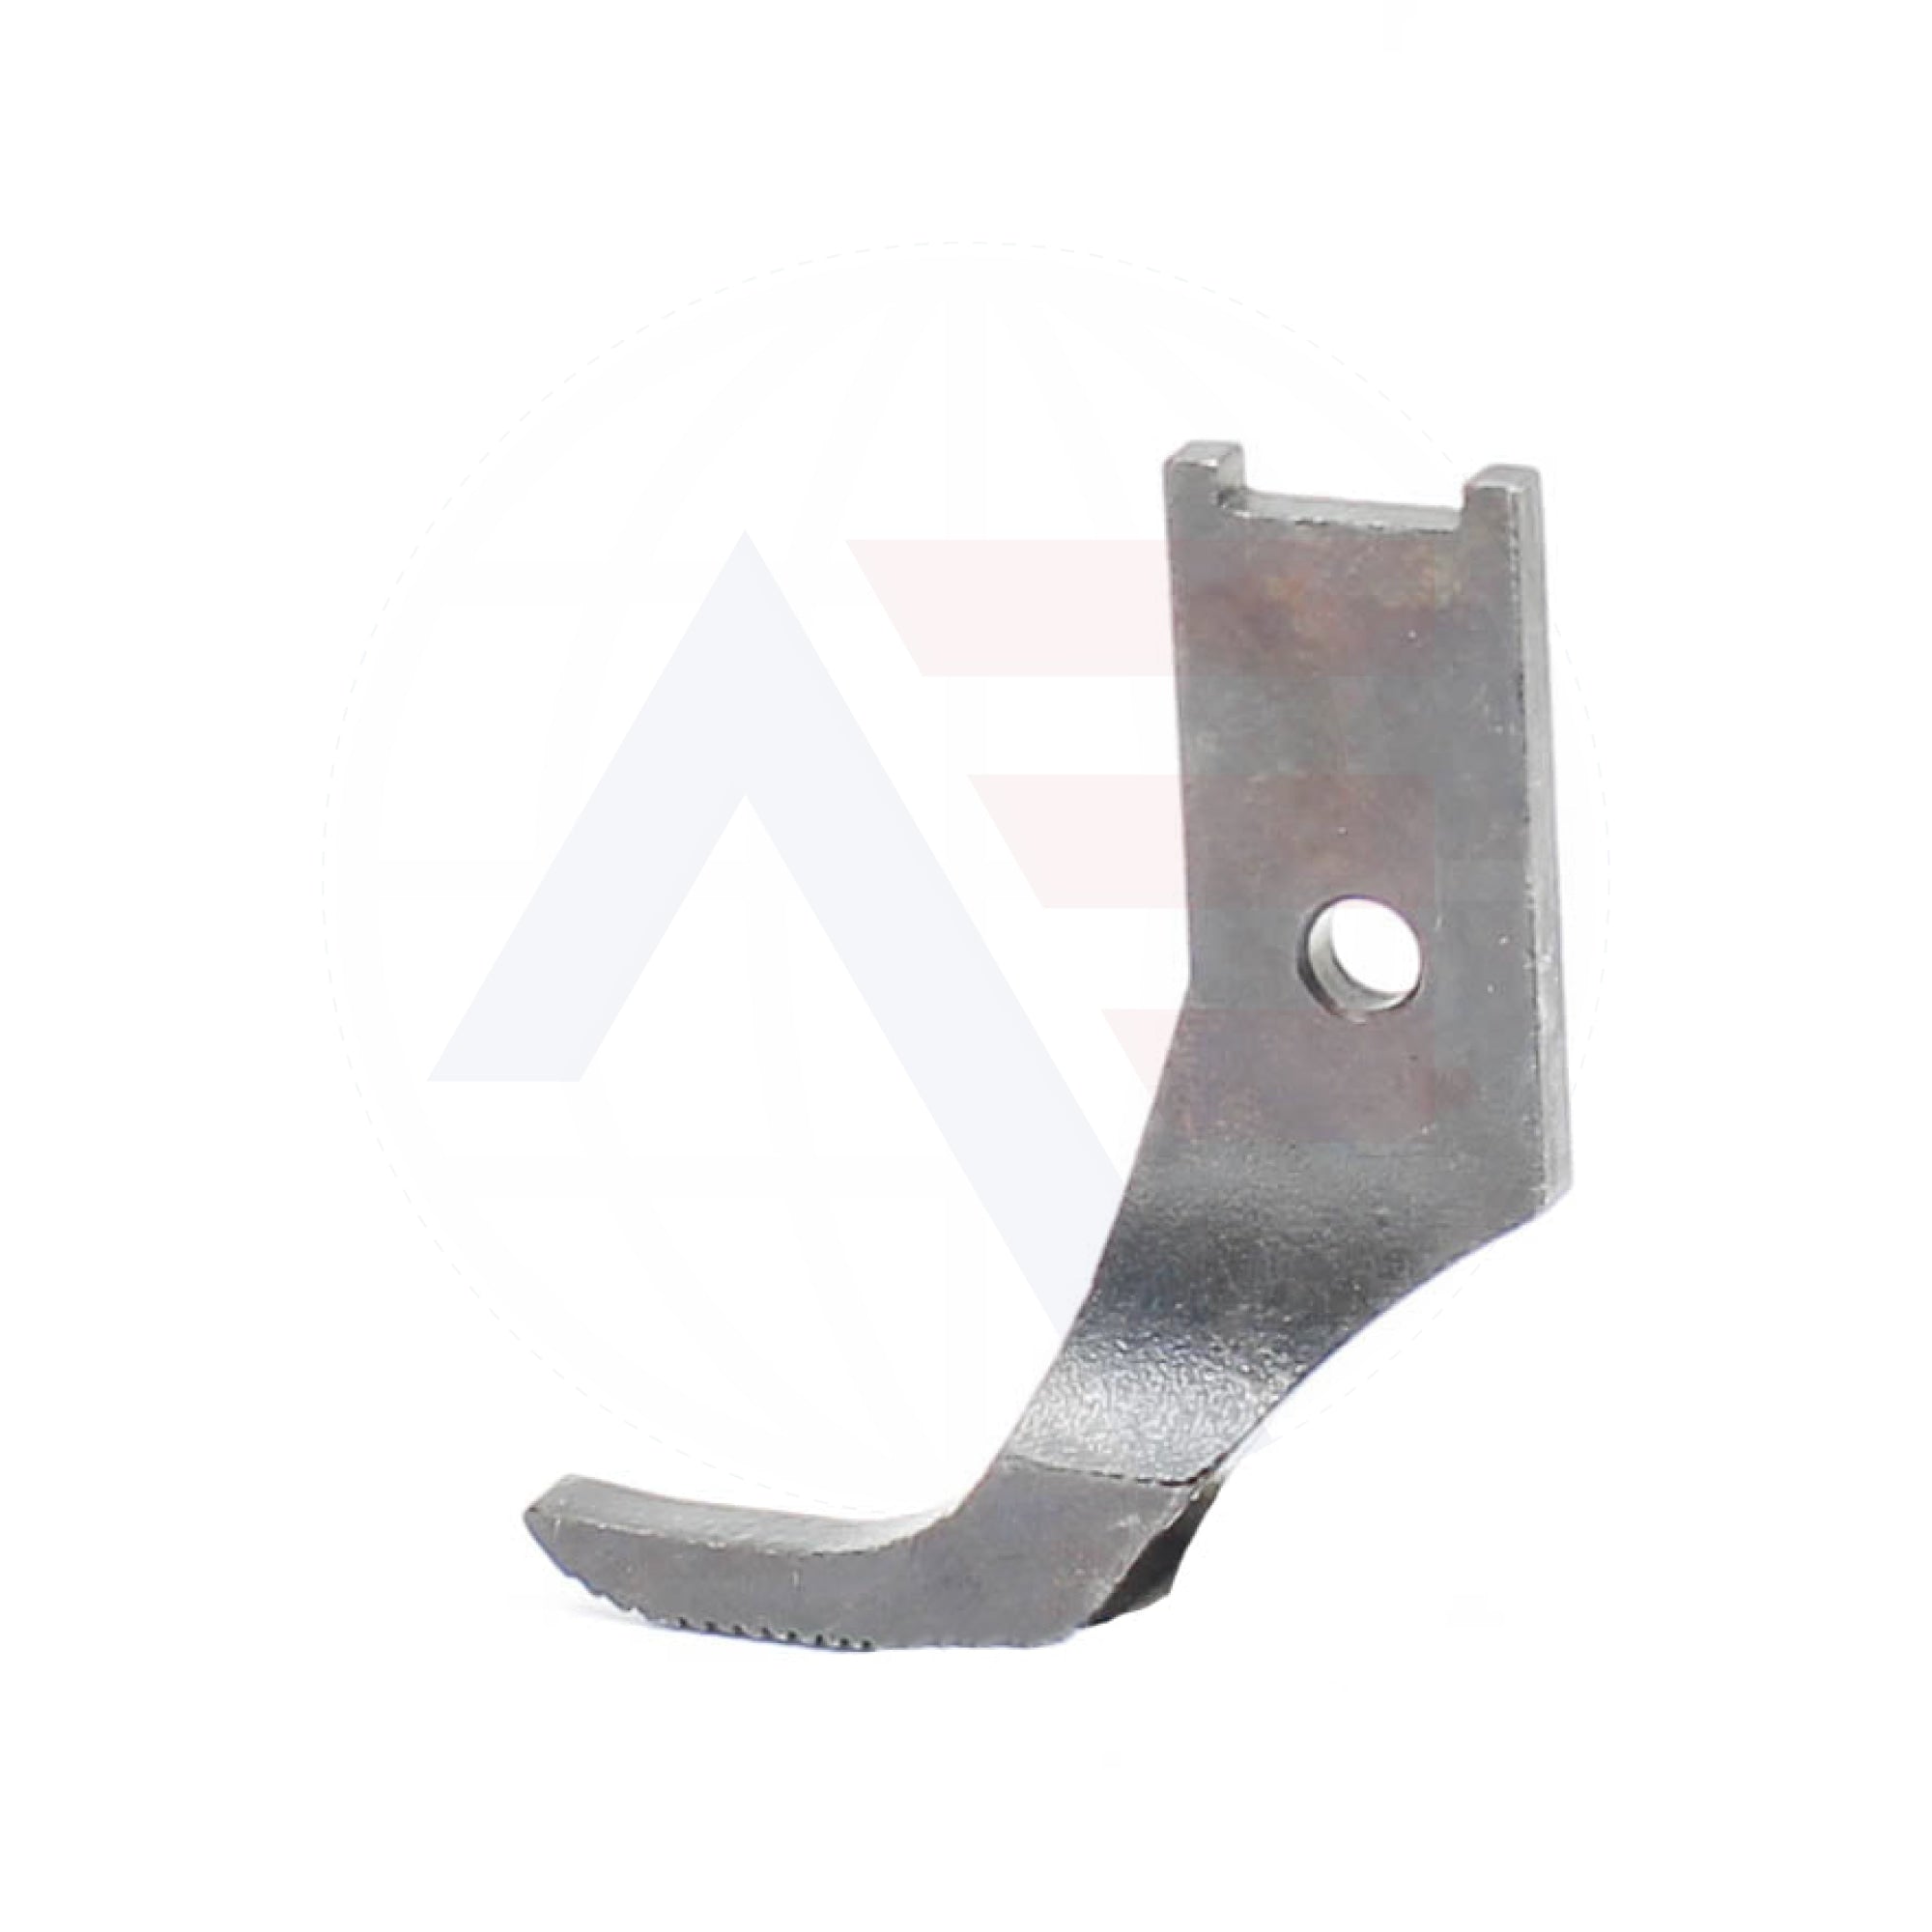 240130 Outside Foot Sewing Machine Spare Parts